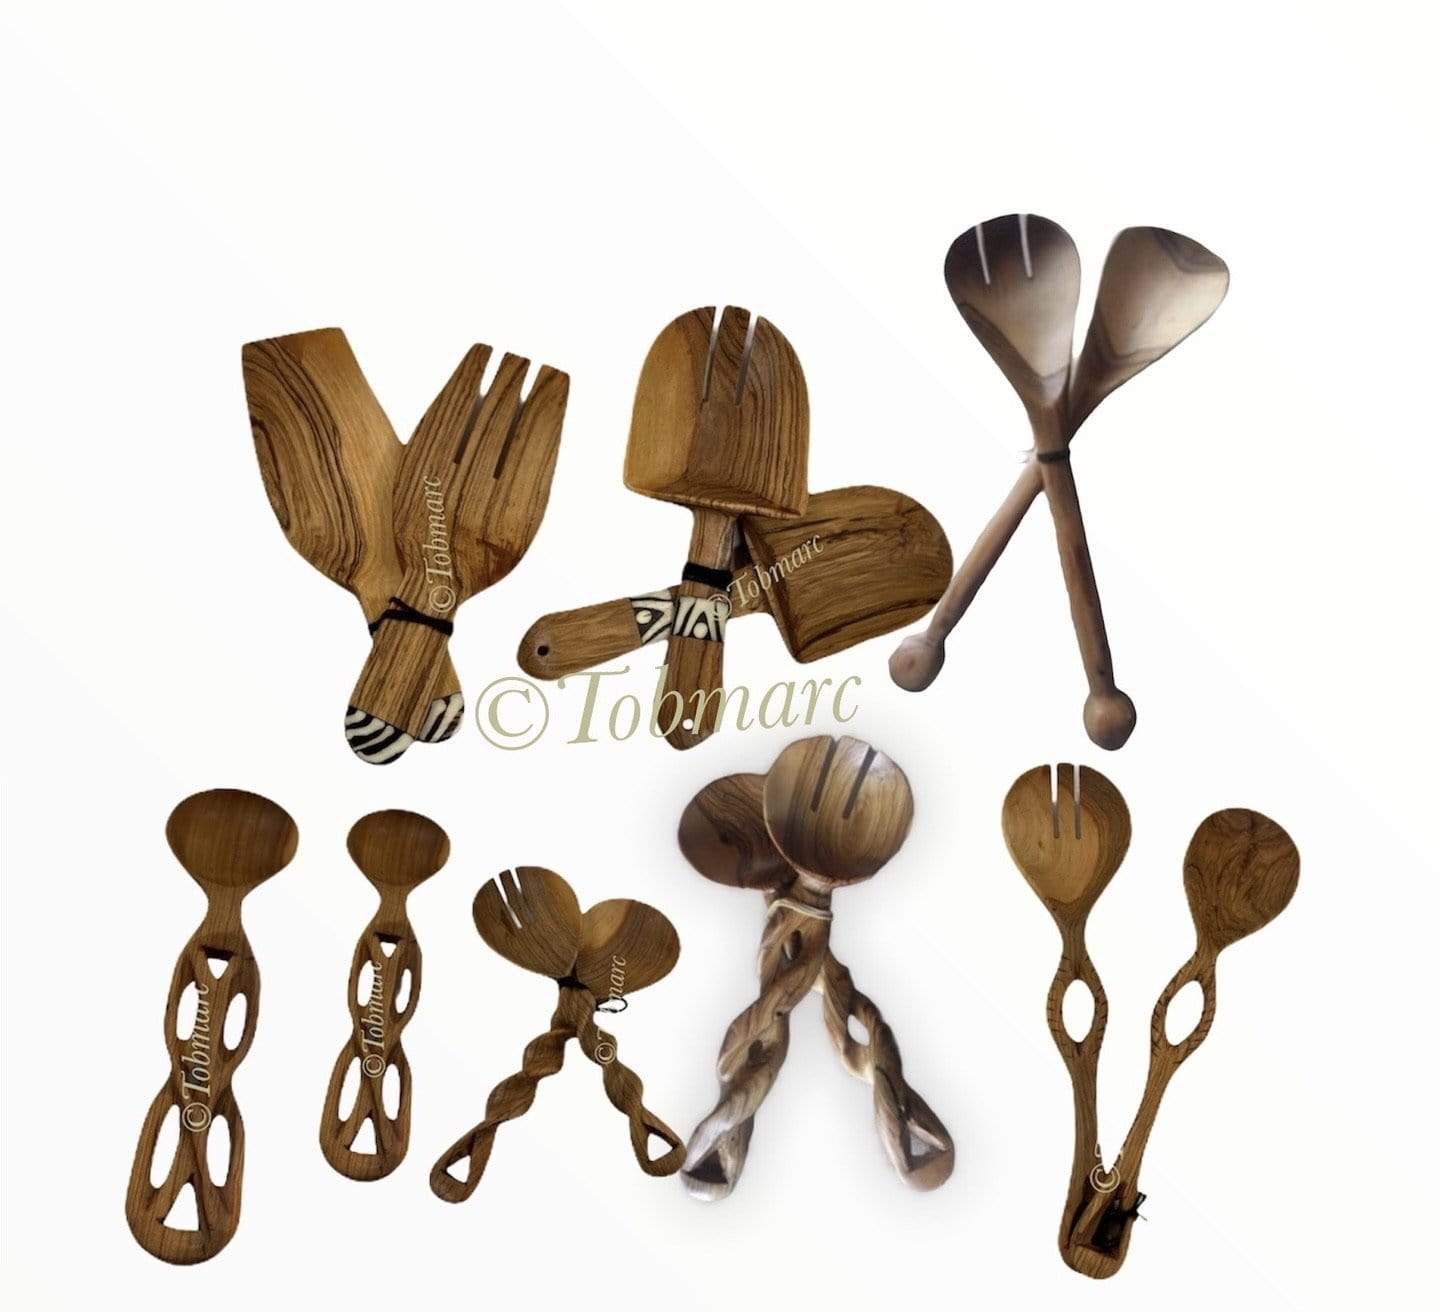 Tobmarc Handcrafted Olive Wood Serving Spoons